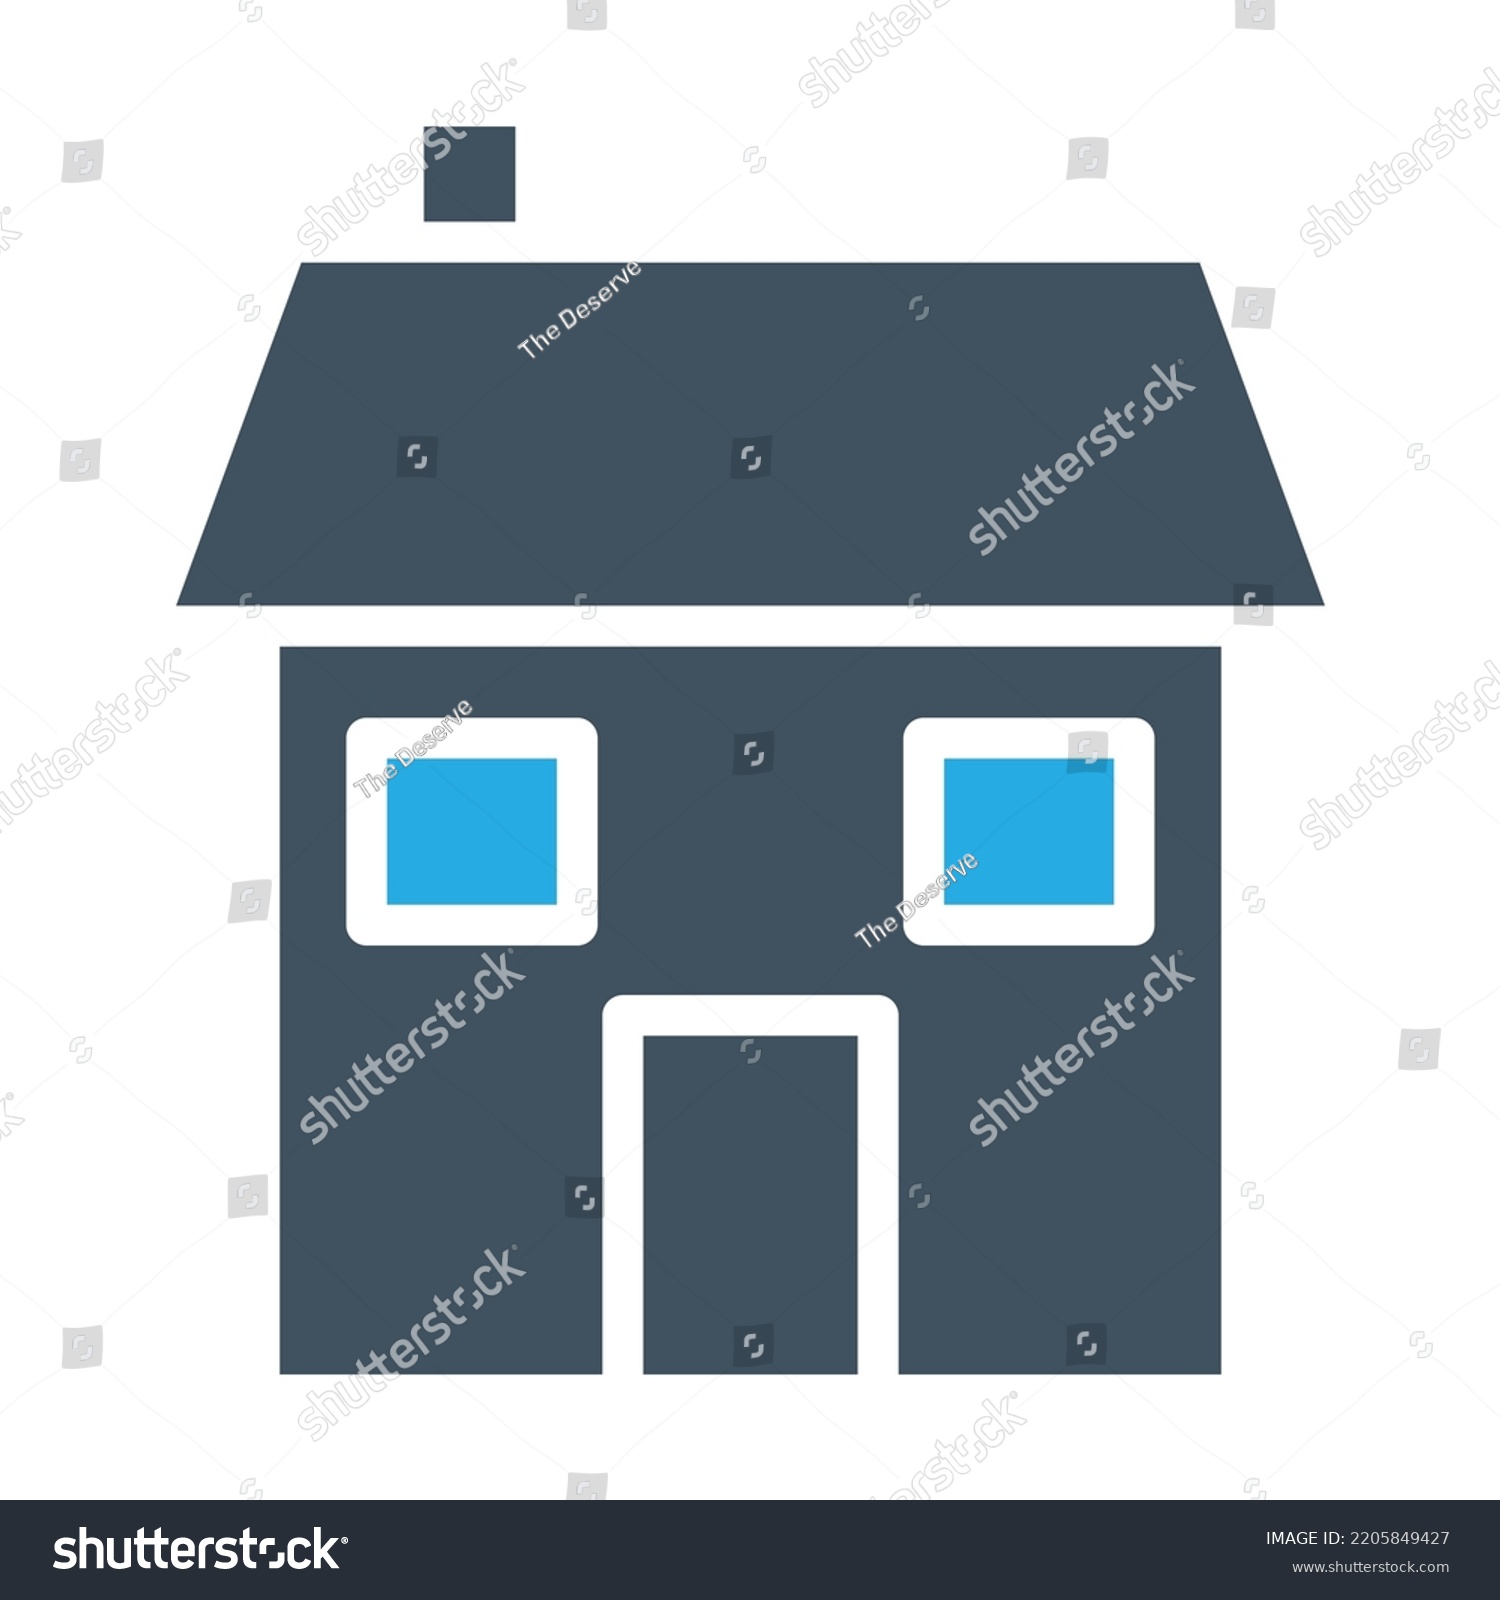 SVG of House Vector Icon which is suitable for commercial work and easily modify or edit it

 svg